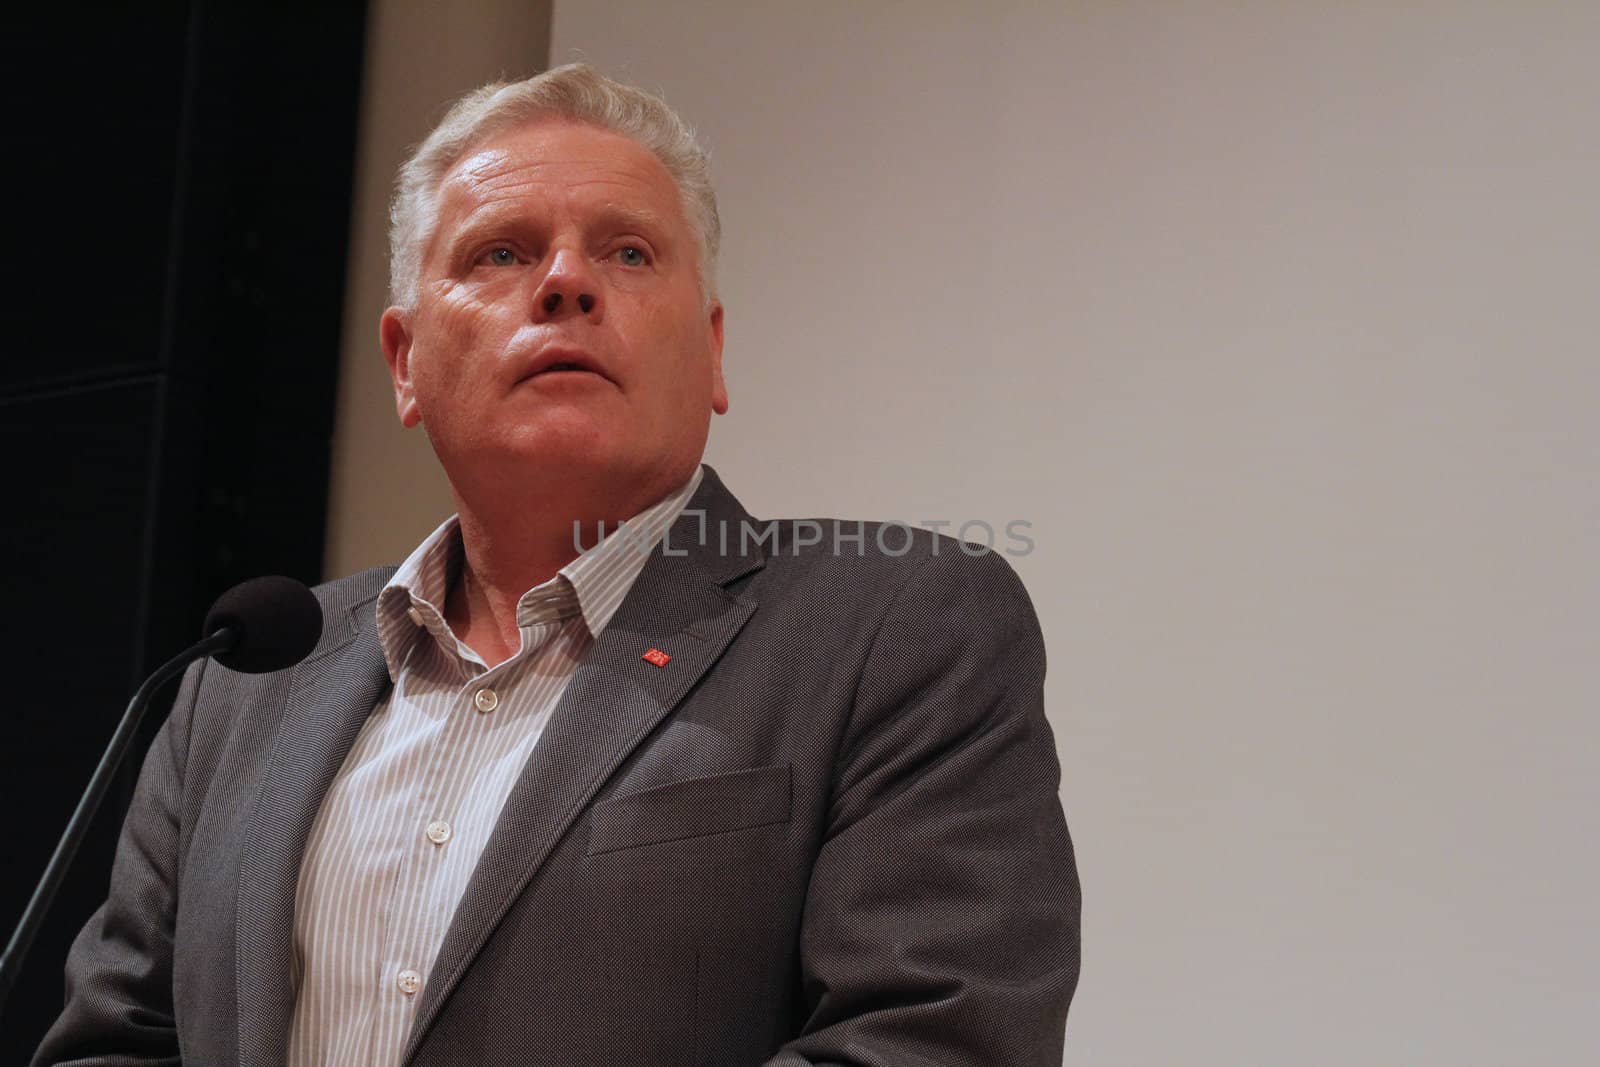 Jan Davidsen is leader of the Norwegian Union of Municipal and General Employees (Norwegian: Fagforbundet). It has a membership of 315,000 and is affiliated with the Norwegian Confederation of Trade Unions (LO).